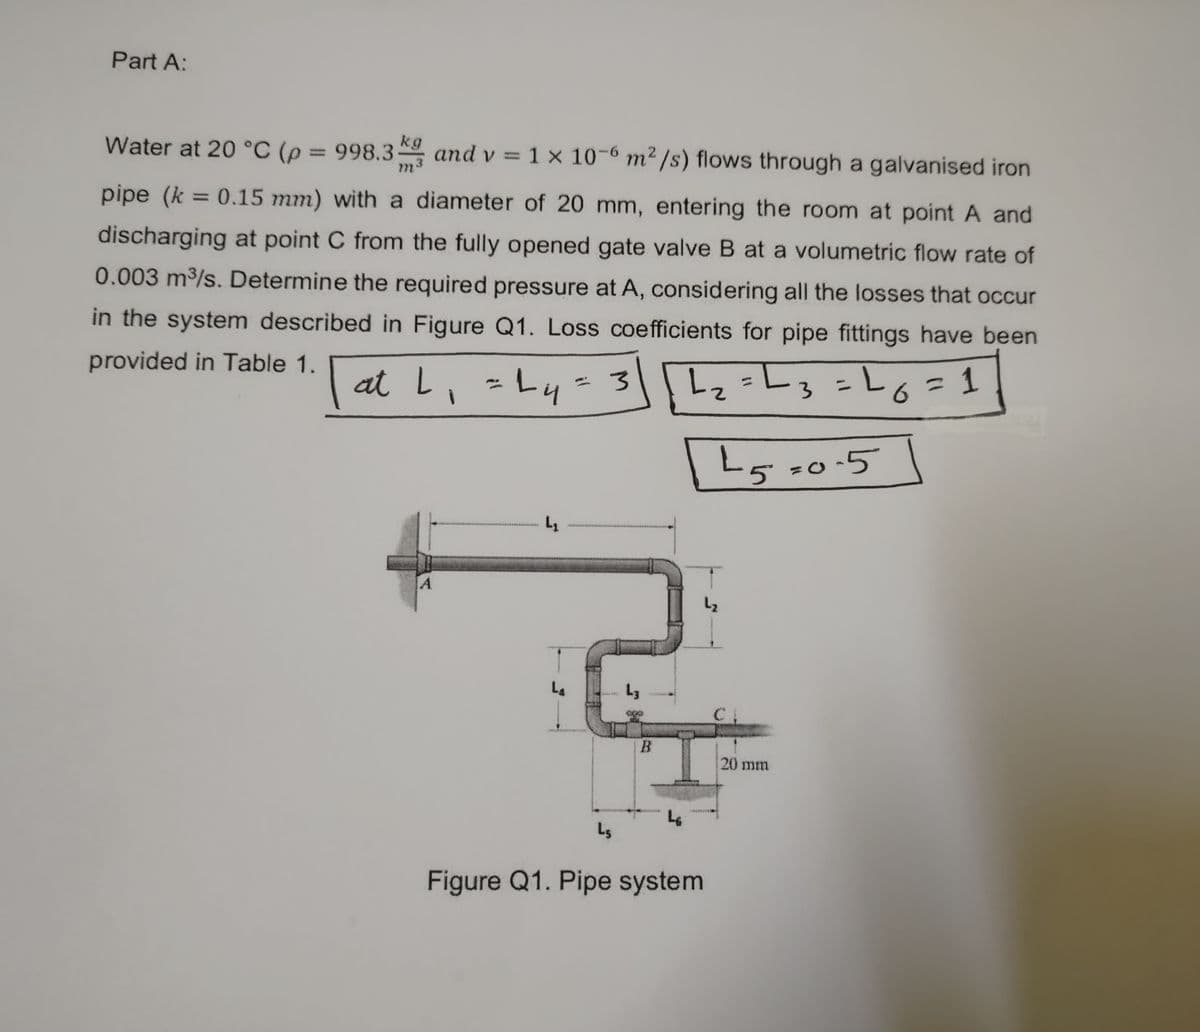 Part A:
Water at 20 °C (p = 998.3 and v=
kg
1 x 10-6 m²/s) flows through a galvanised iron
pipe (k = 0.15 mm) with a diameter of 20 mm, entering the room at point A and
discharging at point C from the fully opened gate valve B at a volumetric flow rate of
0.003 m³/s. Determine the required pressure at A, considering all the losses that occur
in the system described in Figure Q1. Loss coefficients for pipe fittings have been
provided in Table 1.
L₂=L3
at L₁ = L₁ = 3
=L4=
A
L₂
La
L5
L3
B
Figure Q1. Pipe system
3 =26=1
L5=0-5
20 mm